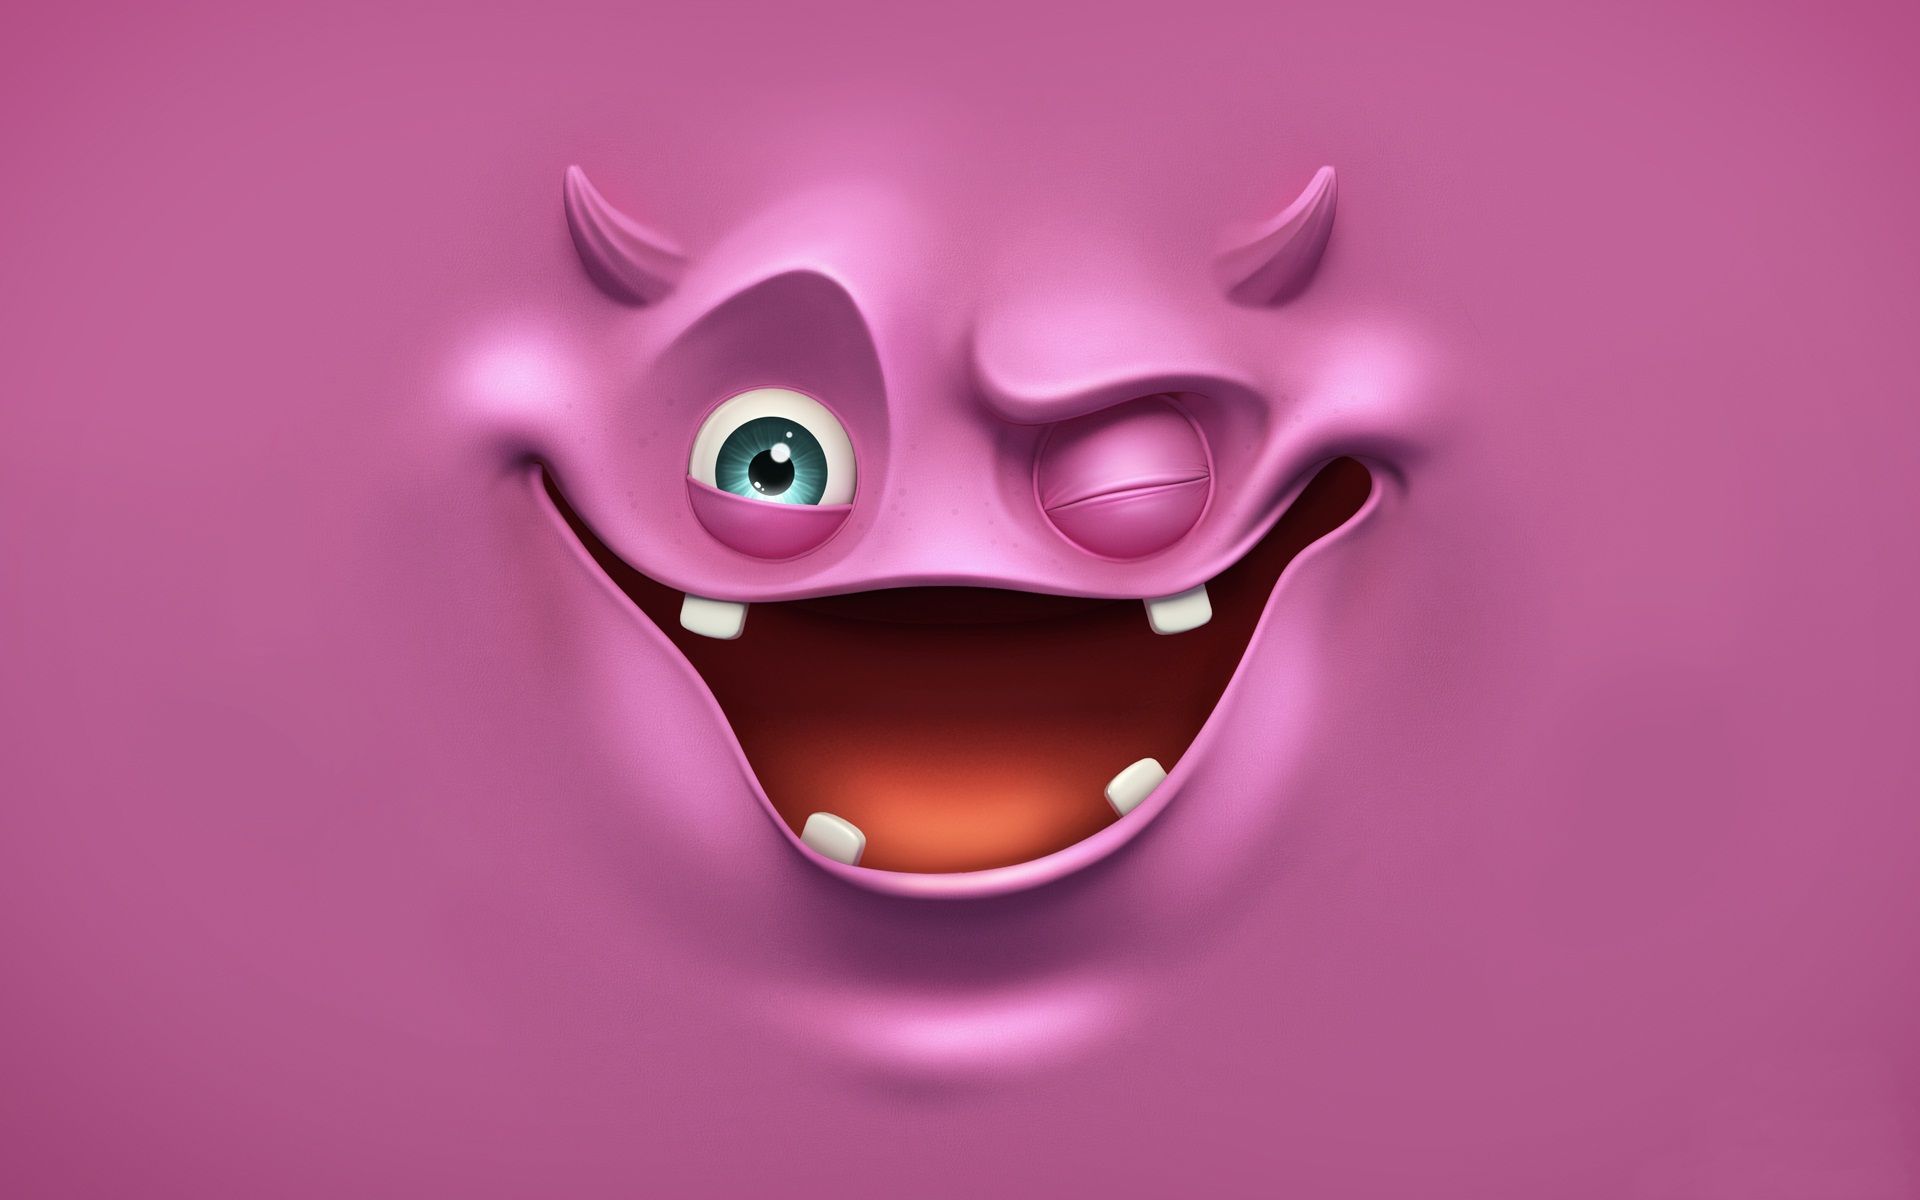 Download-Funny-Evil-Faces-Wallpapers.jpg